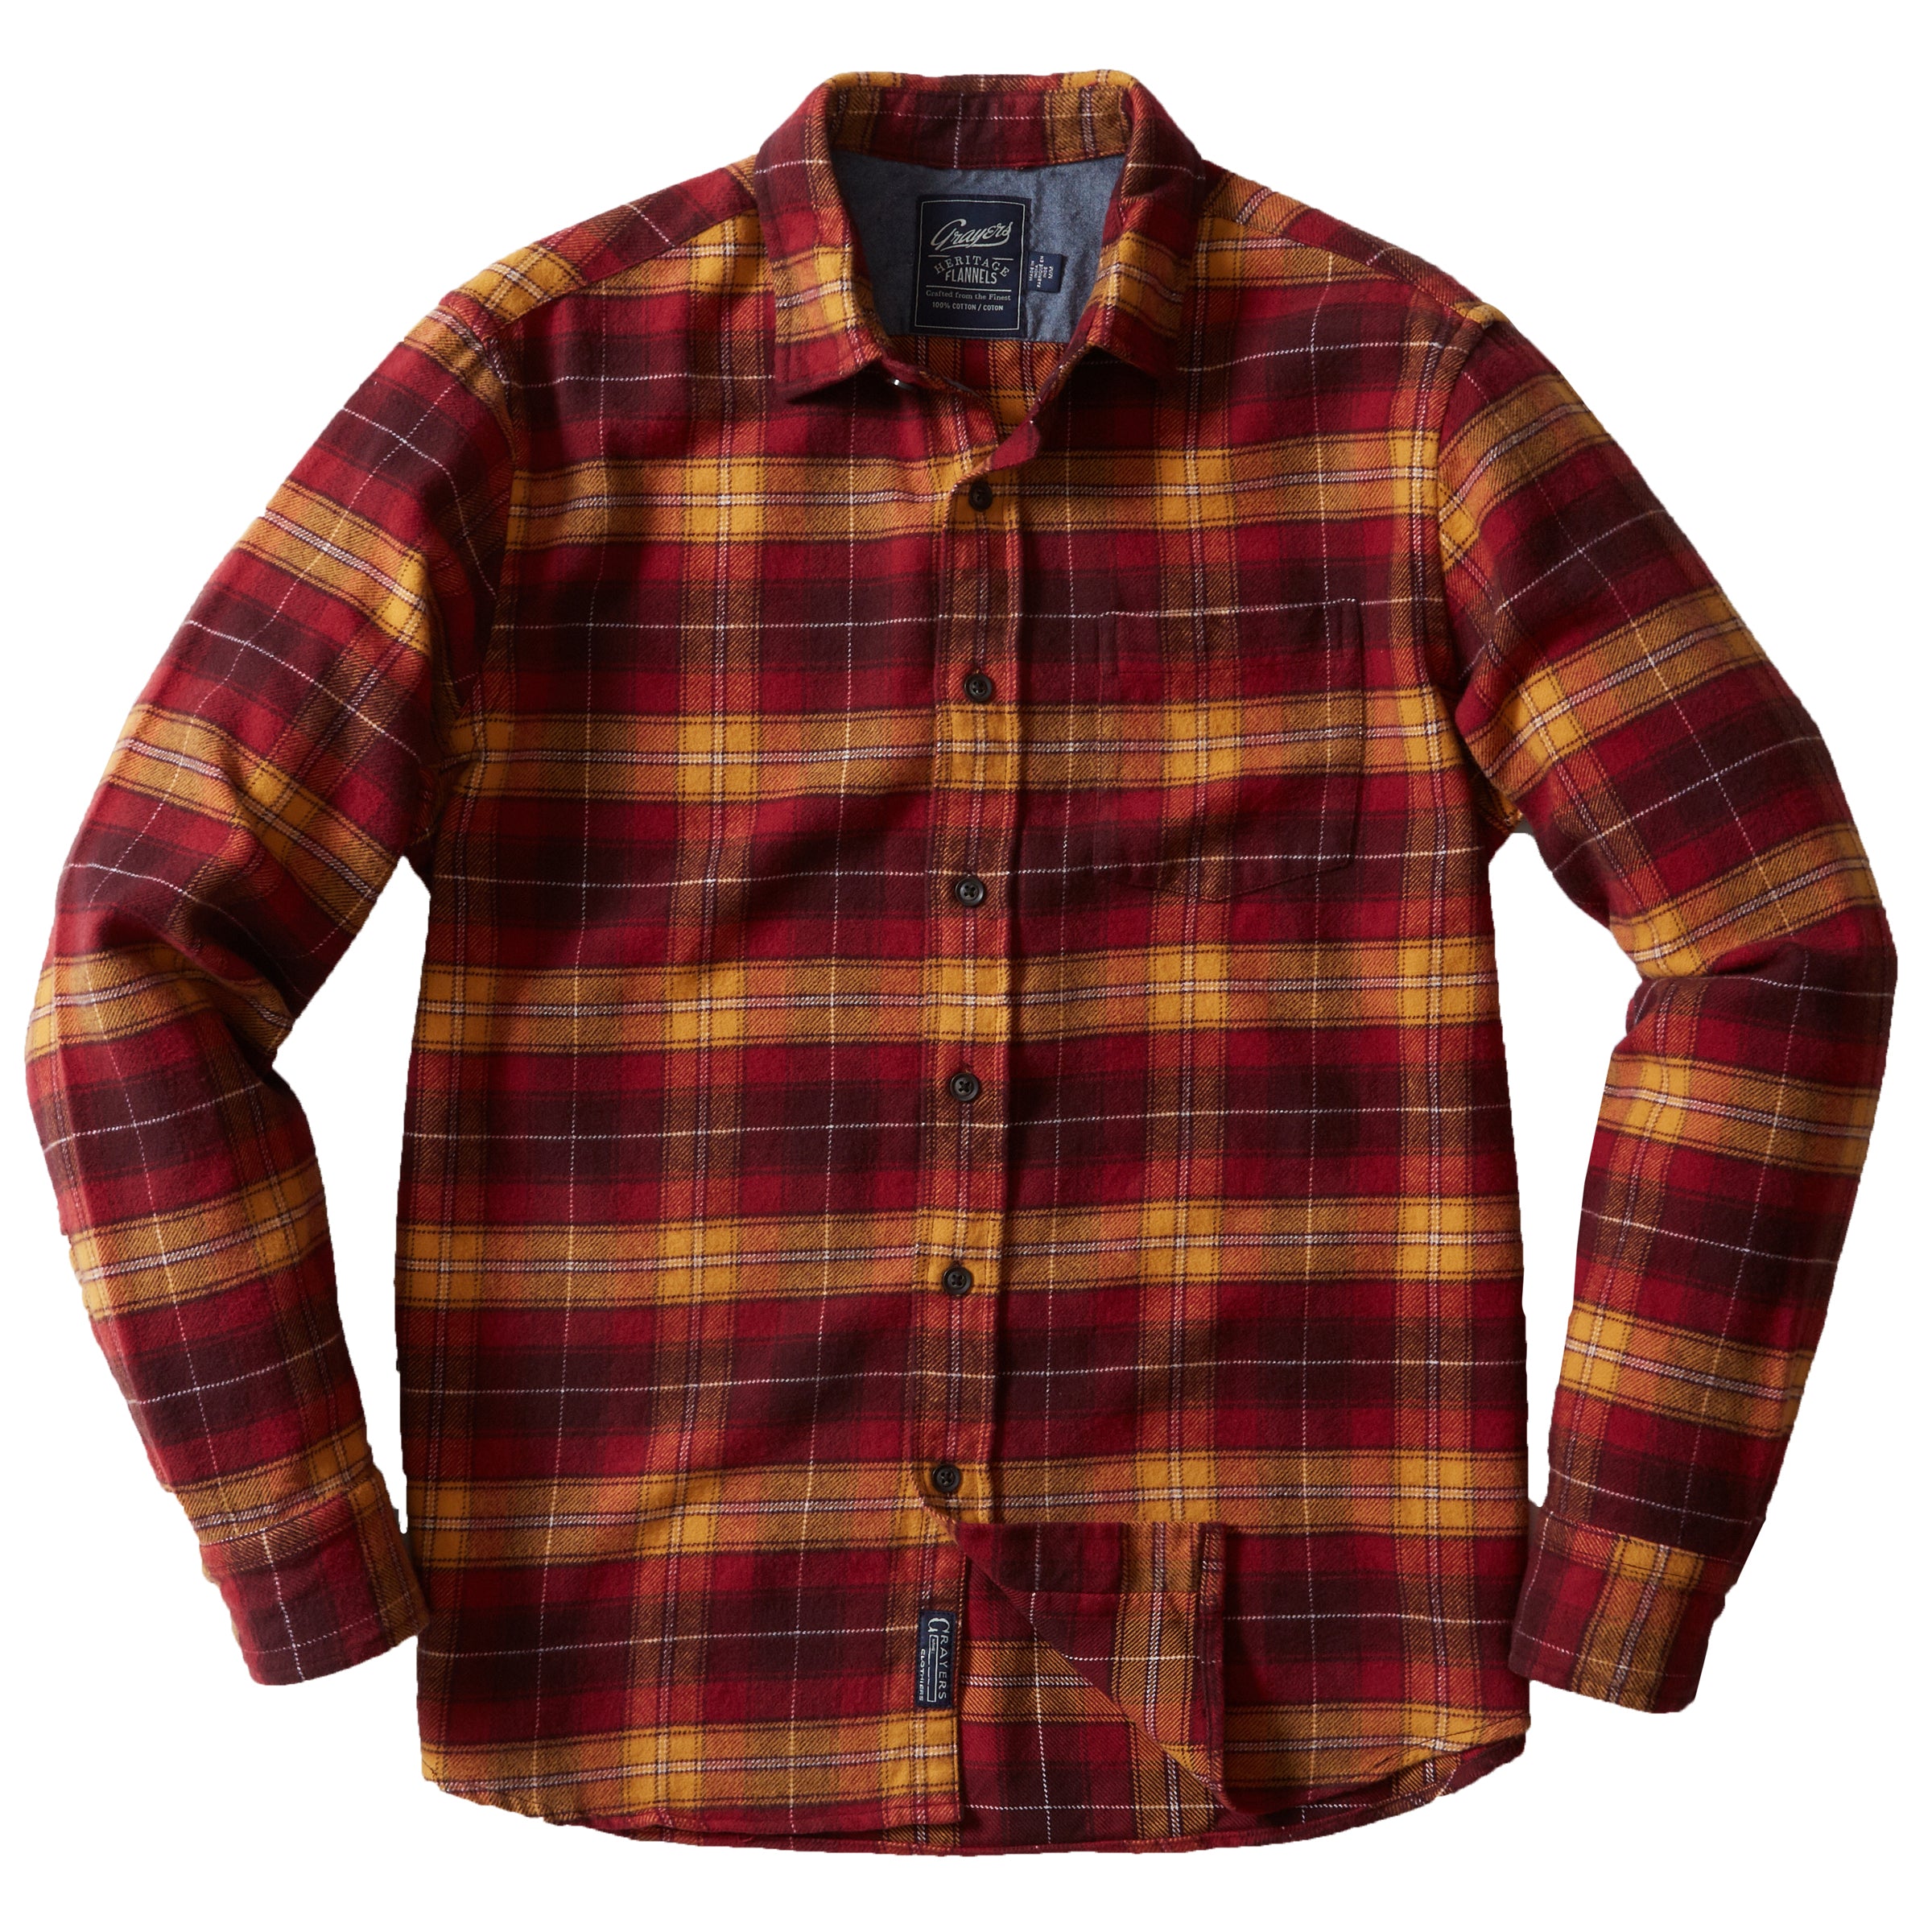 Durango Heritage Flannel - Russet Red Plaid – Grayers